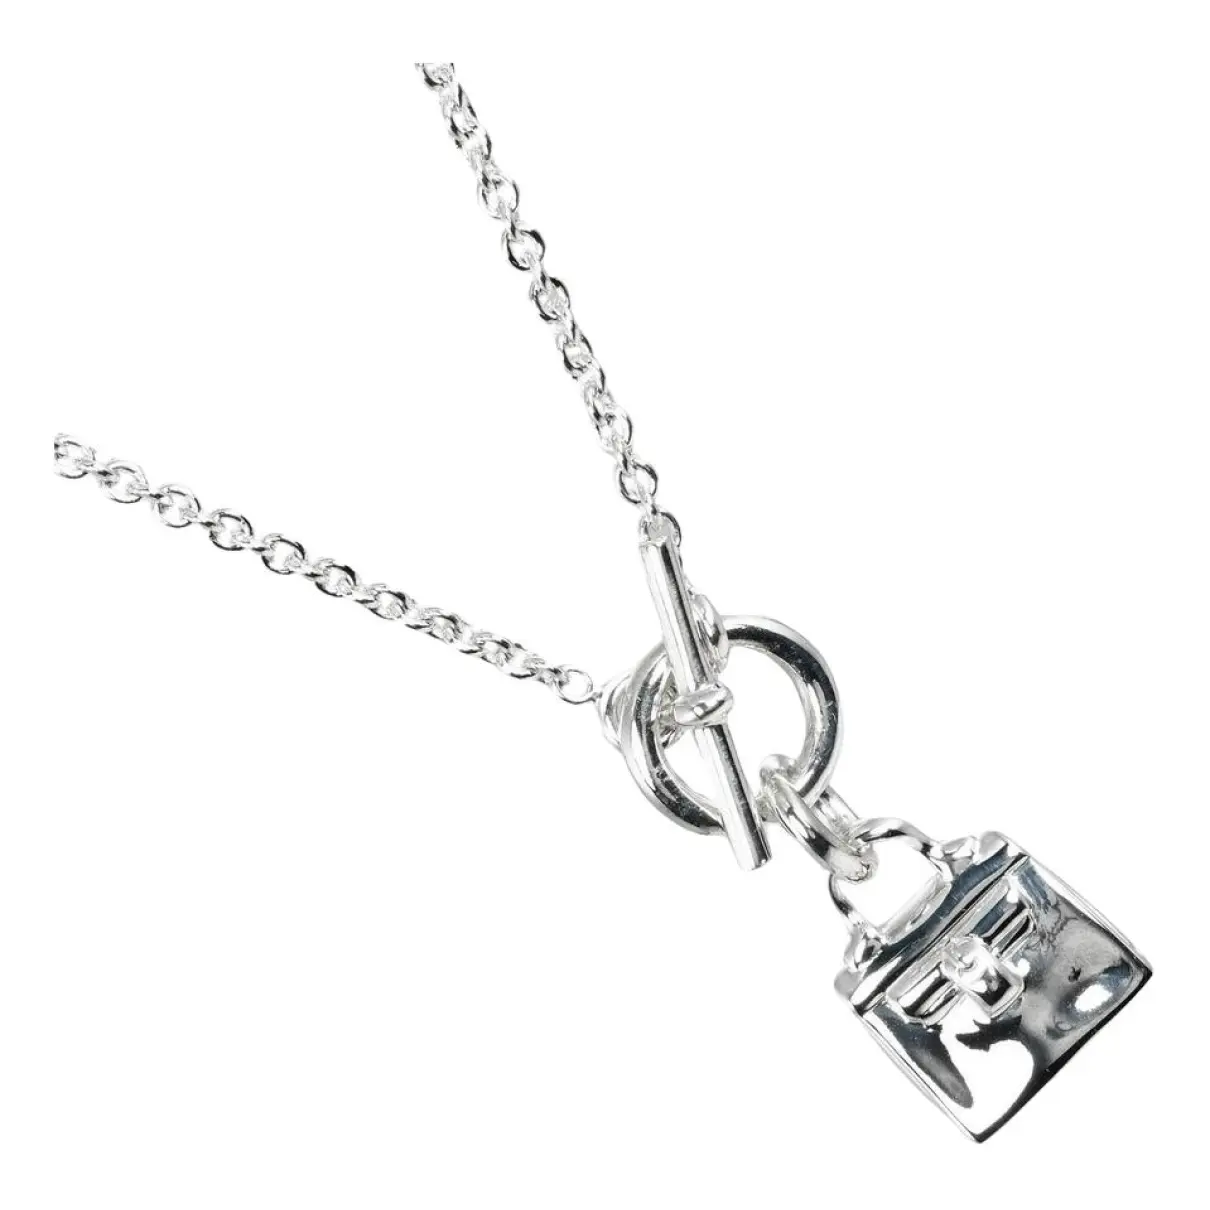 Kelly silver necklace